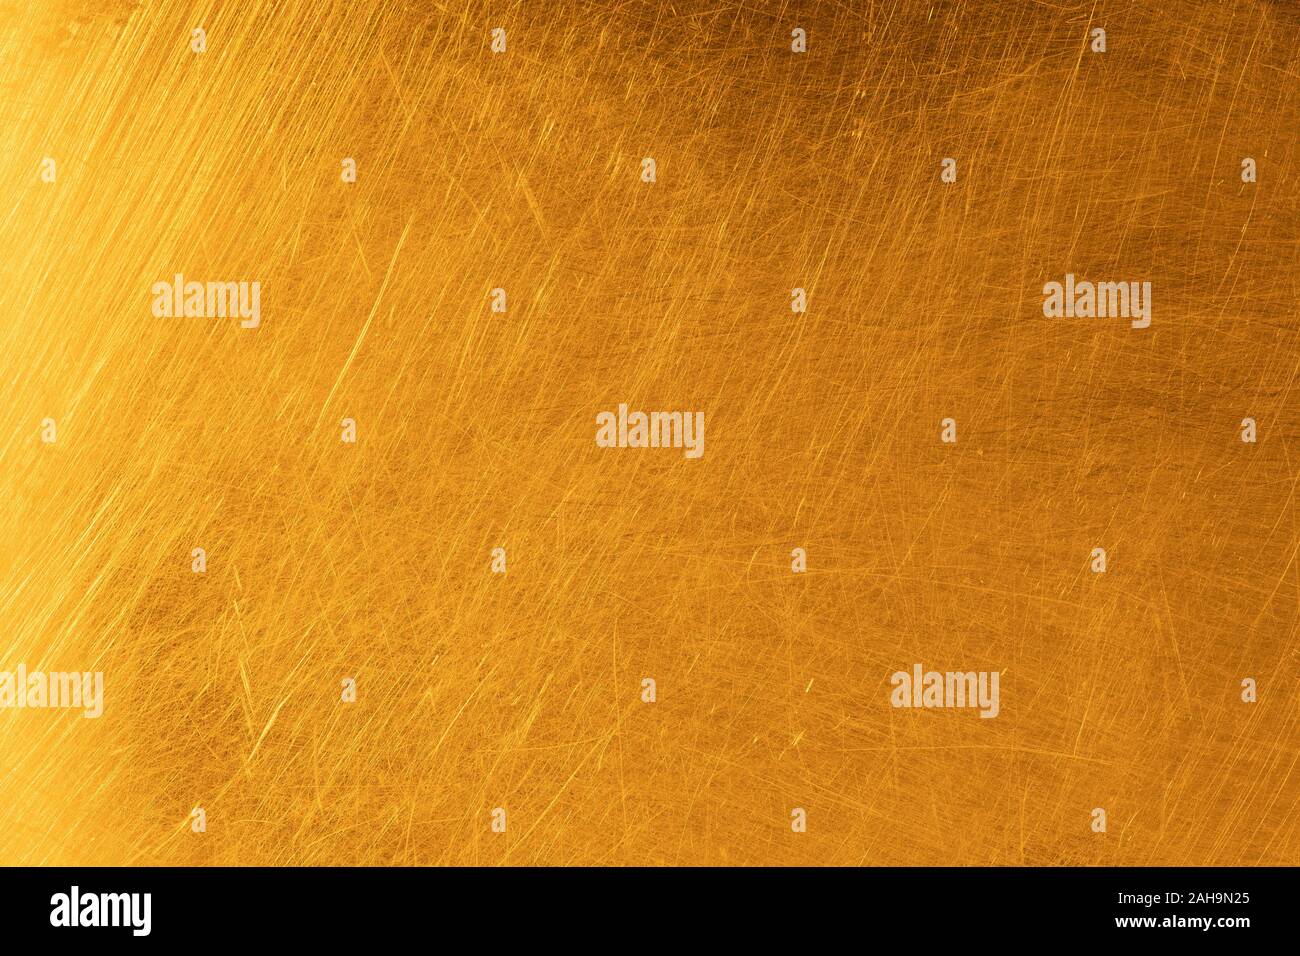 Real gold scratched metal texture background Stock Photo